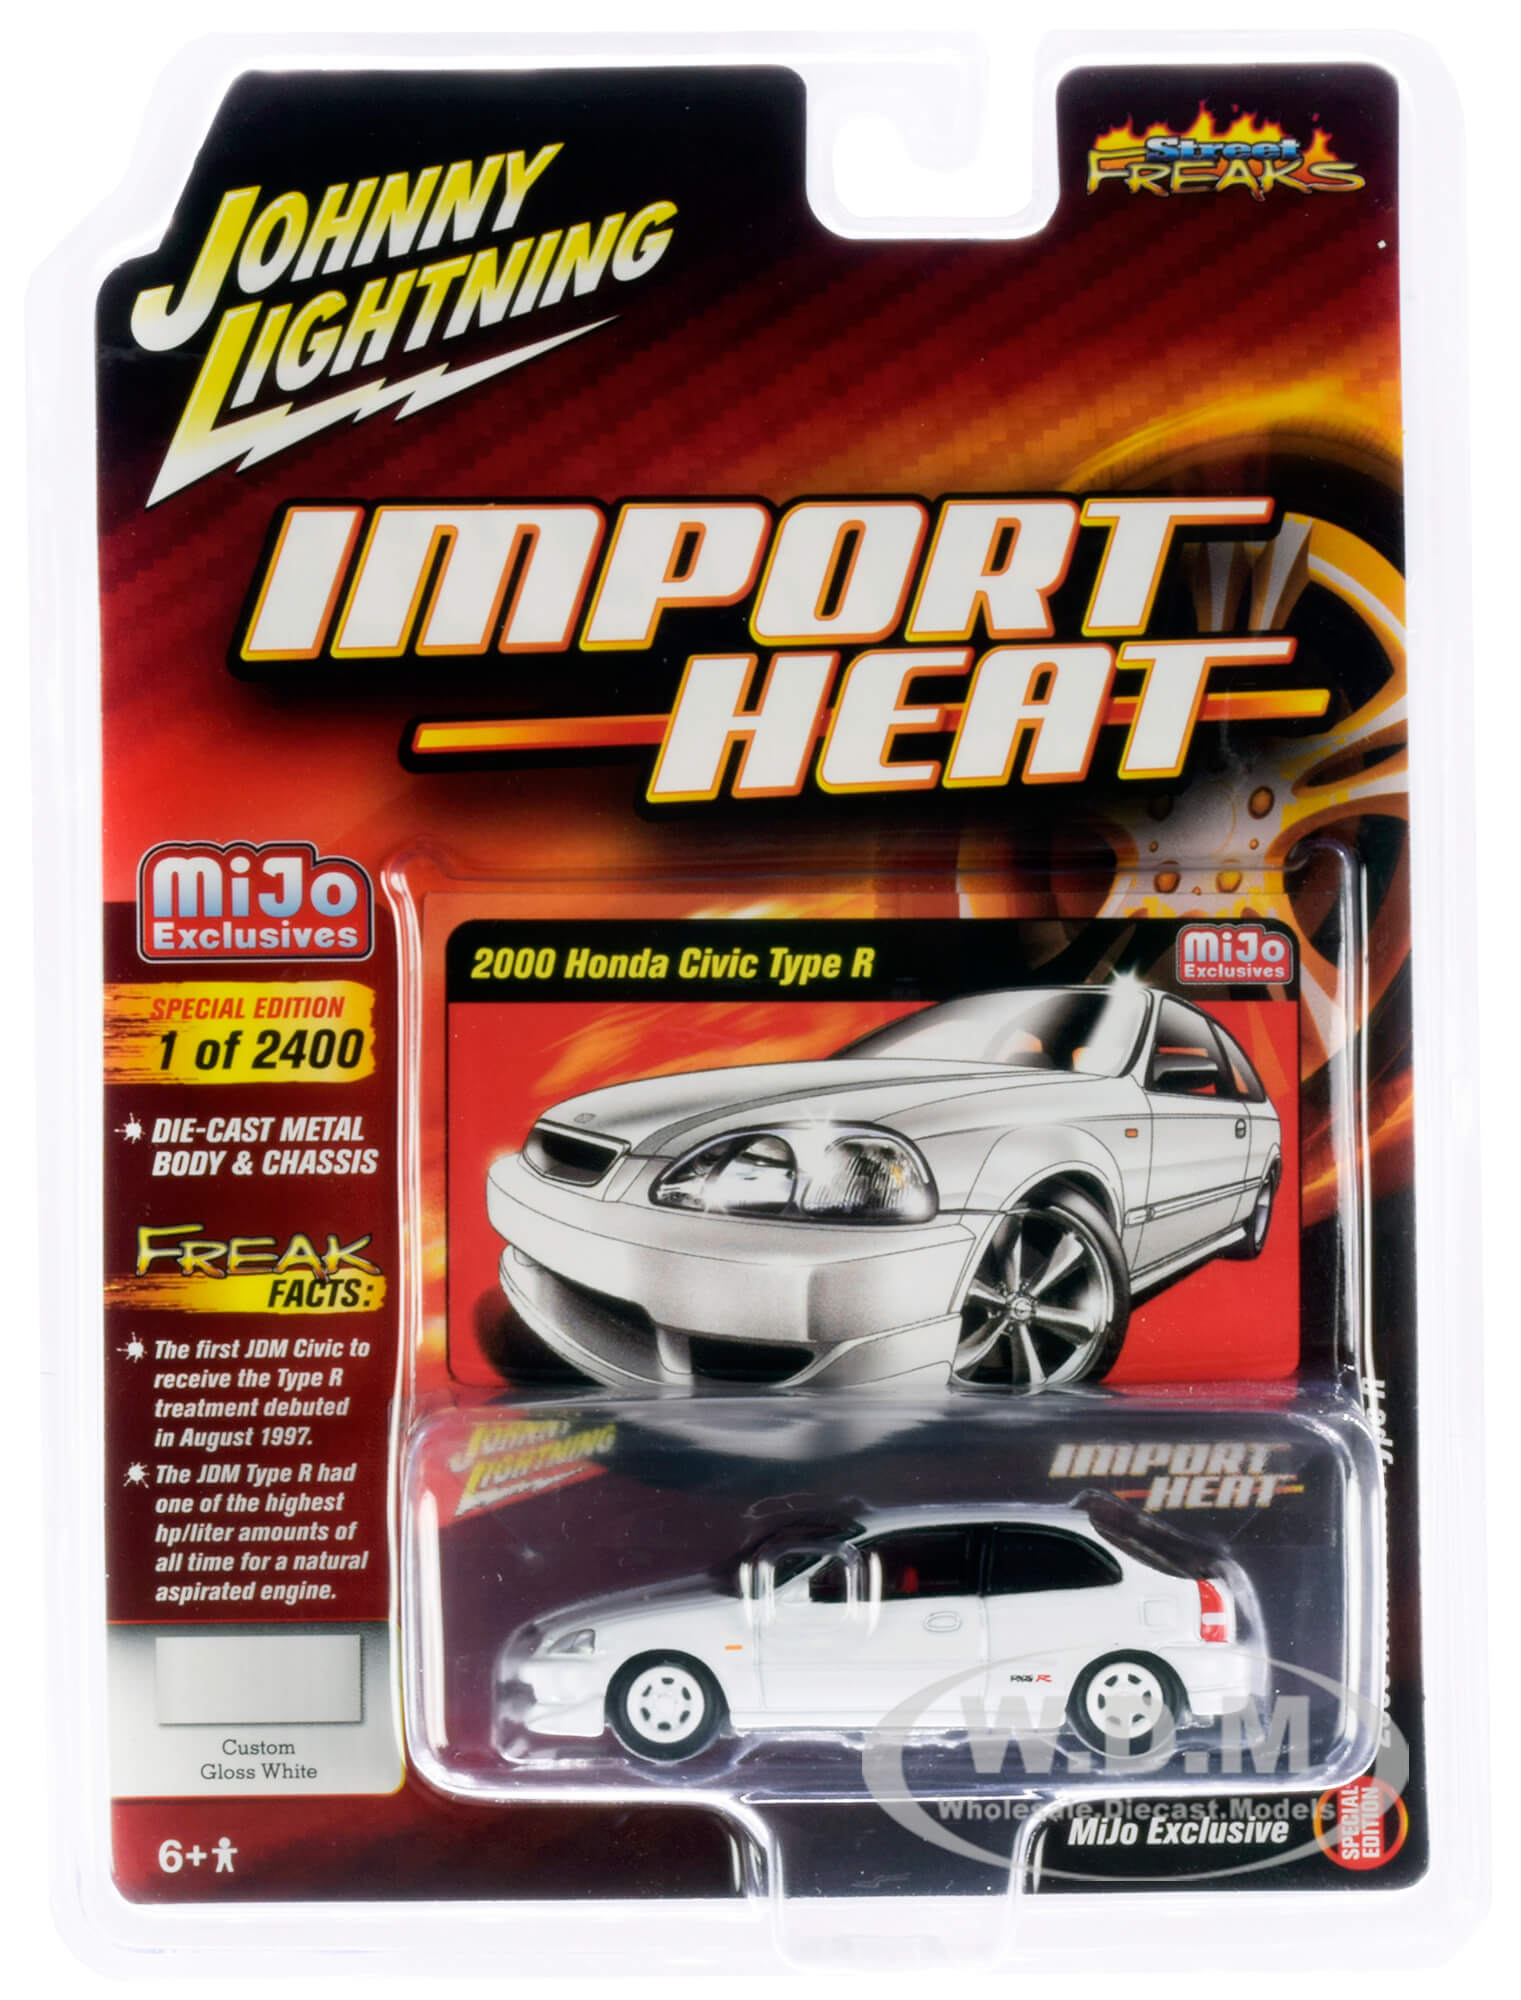 2000 Honda Civic Type R White with White Wheels and Red Interior "Import Heat" "Street Freaks" Series Limited Edition to 2400 pieces Worldwide 1/64 D